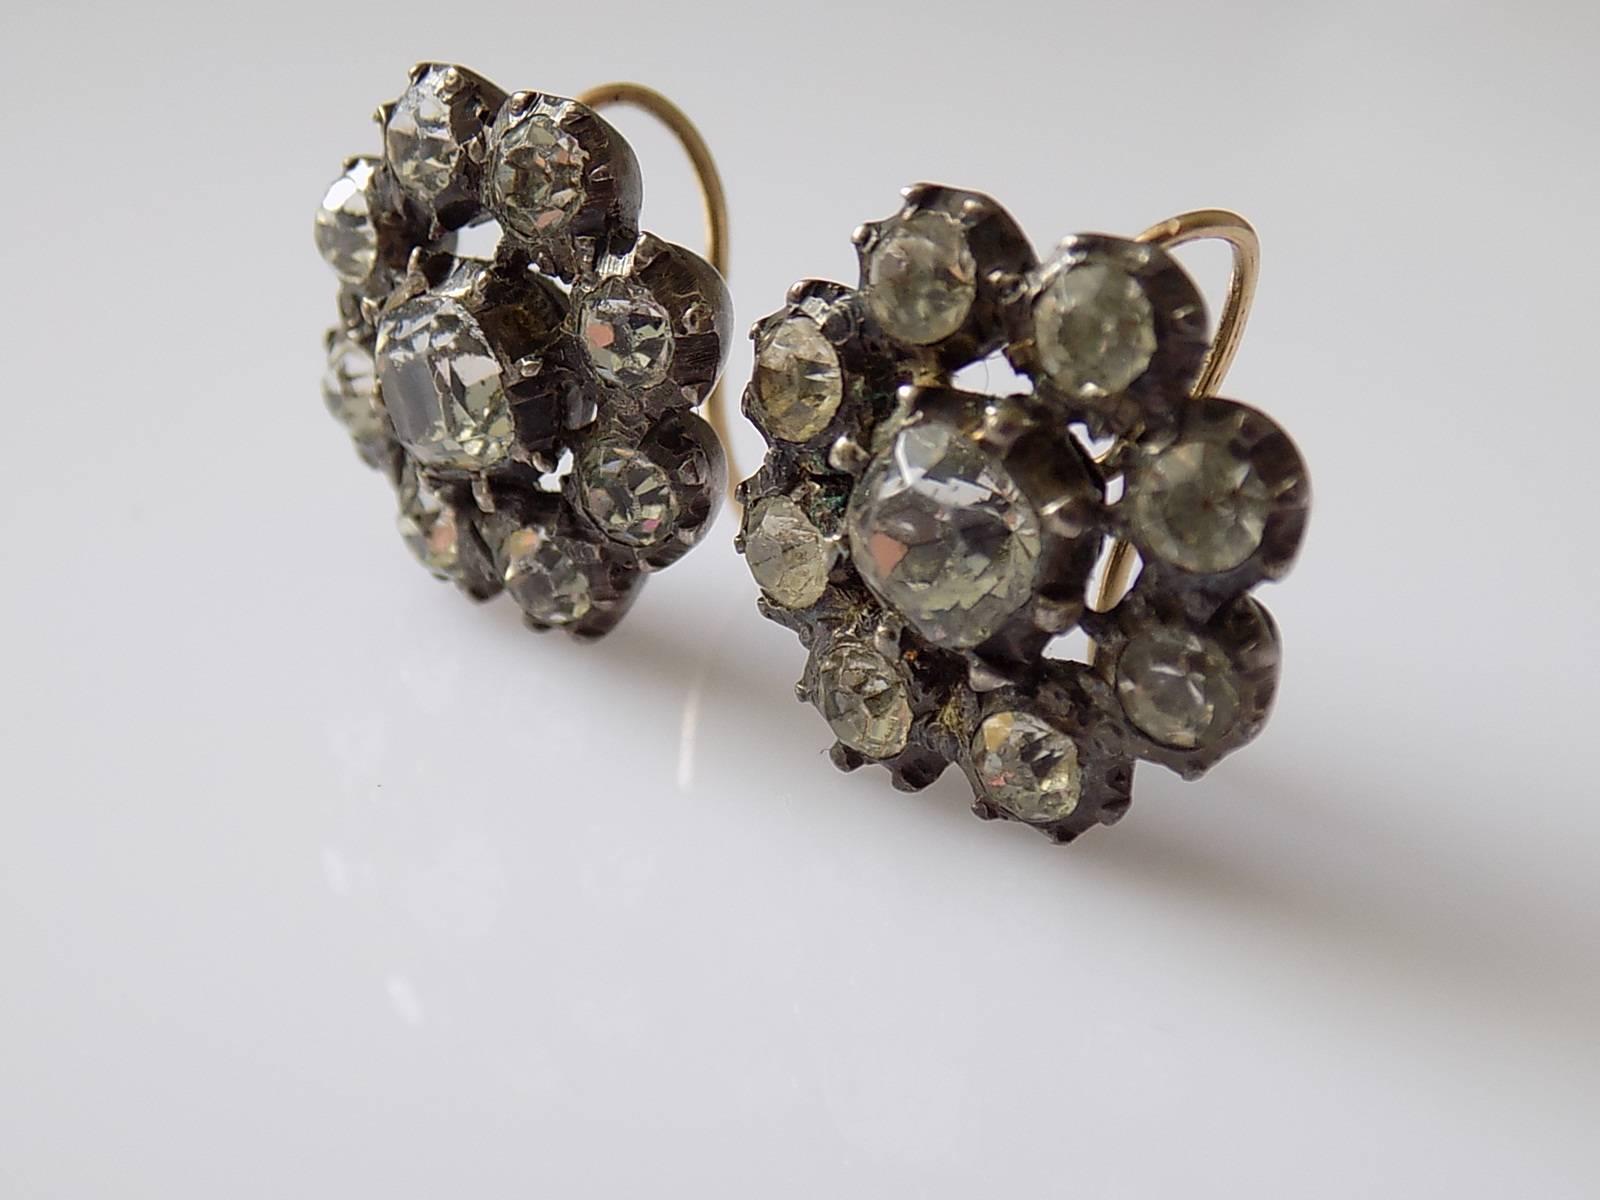 A large Antique Georgian c.1800 cushion and round cut Paste cluster earrings for pierced ears. The foil backed paste in close back solid Silver setting with an yellow Gold hooks. English Origin.
Width 18mm.
Weight 9.2gr.
Unmarked.